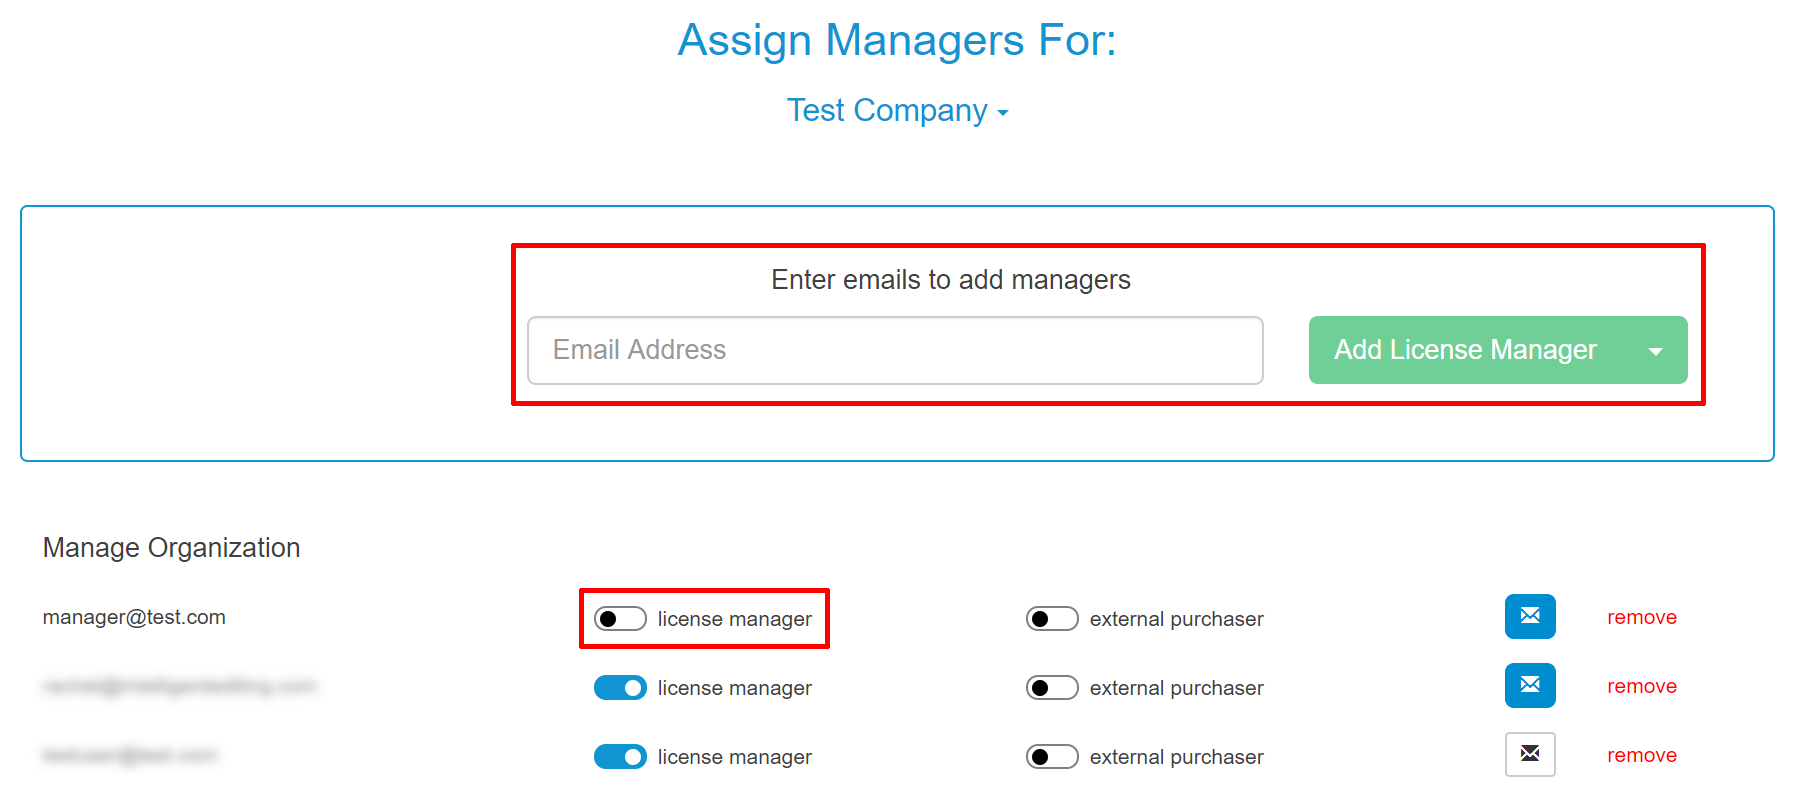 AssignManagers